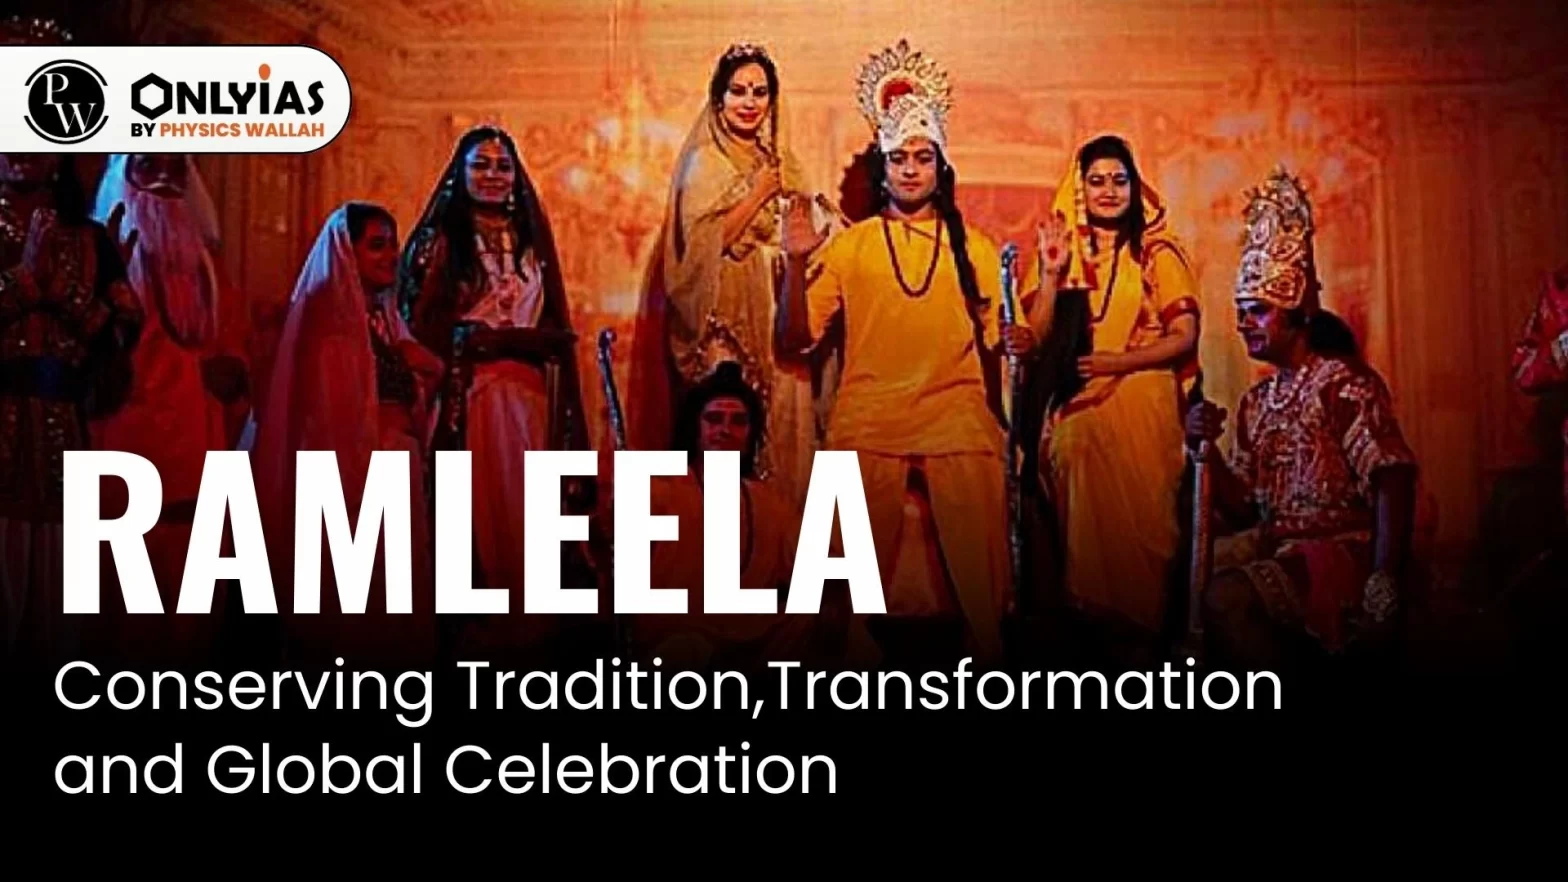 Ramleela: Conserving Tradition, Transformation, and Global Celebration